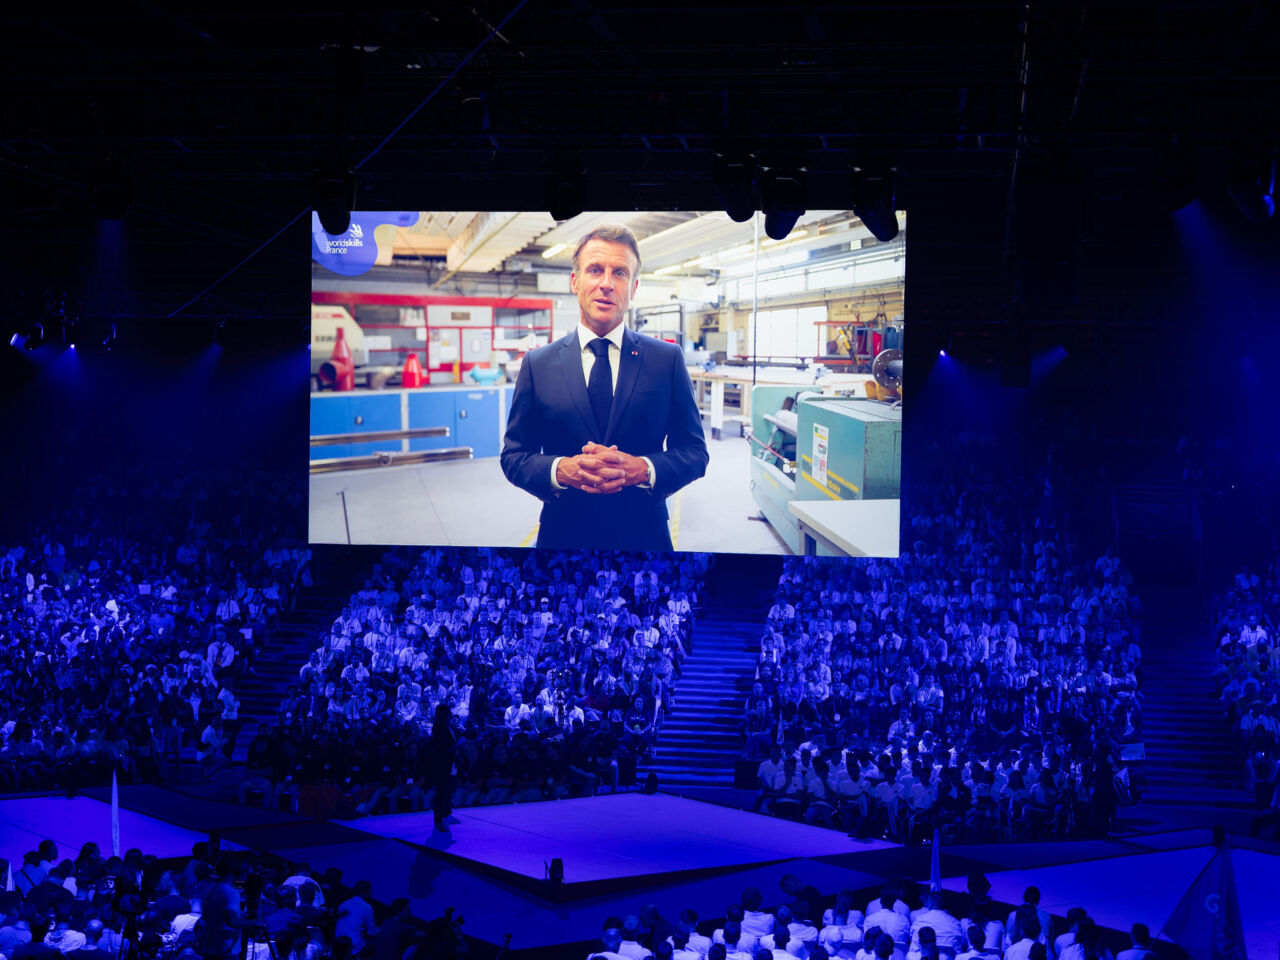 President of the French Republic Emmanuel Macron addressing the Closing Ceremony via a video.
